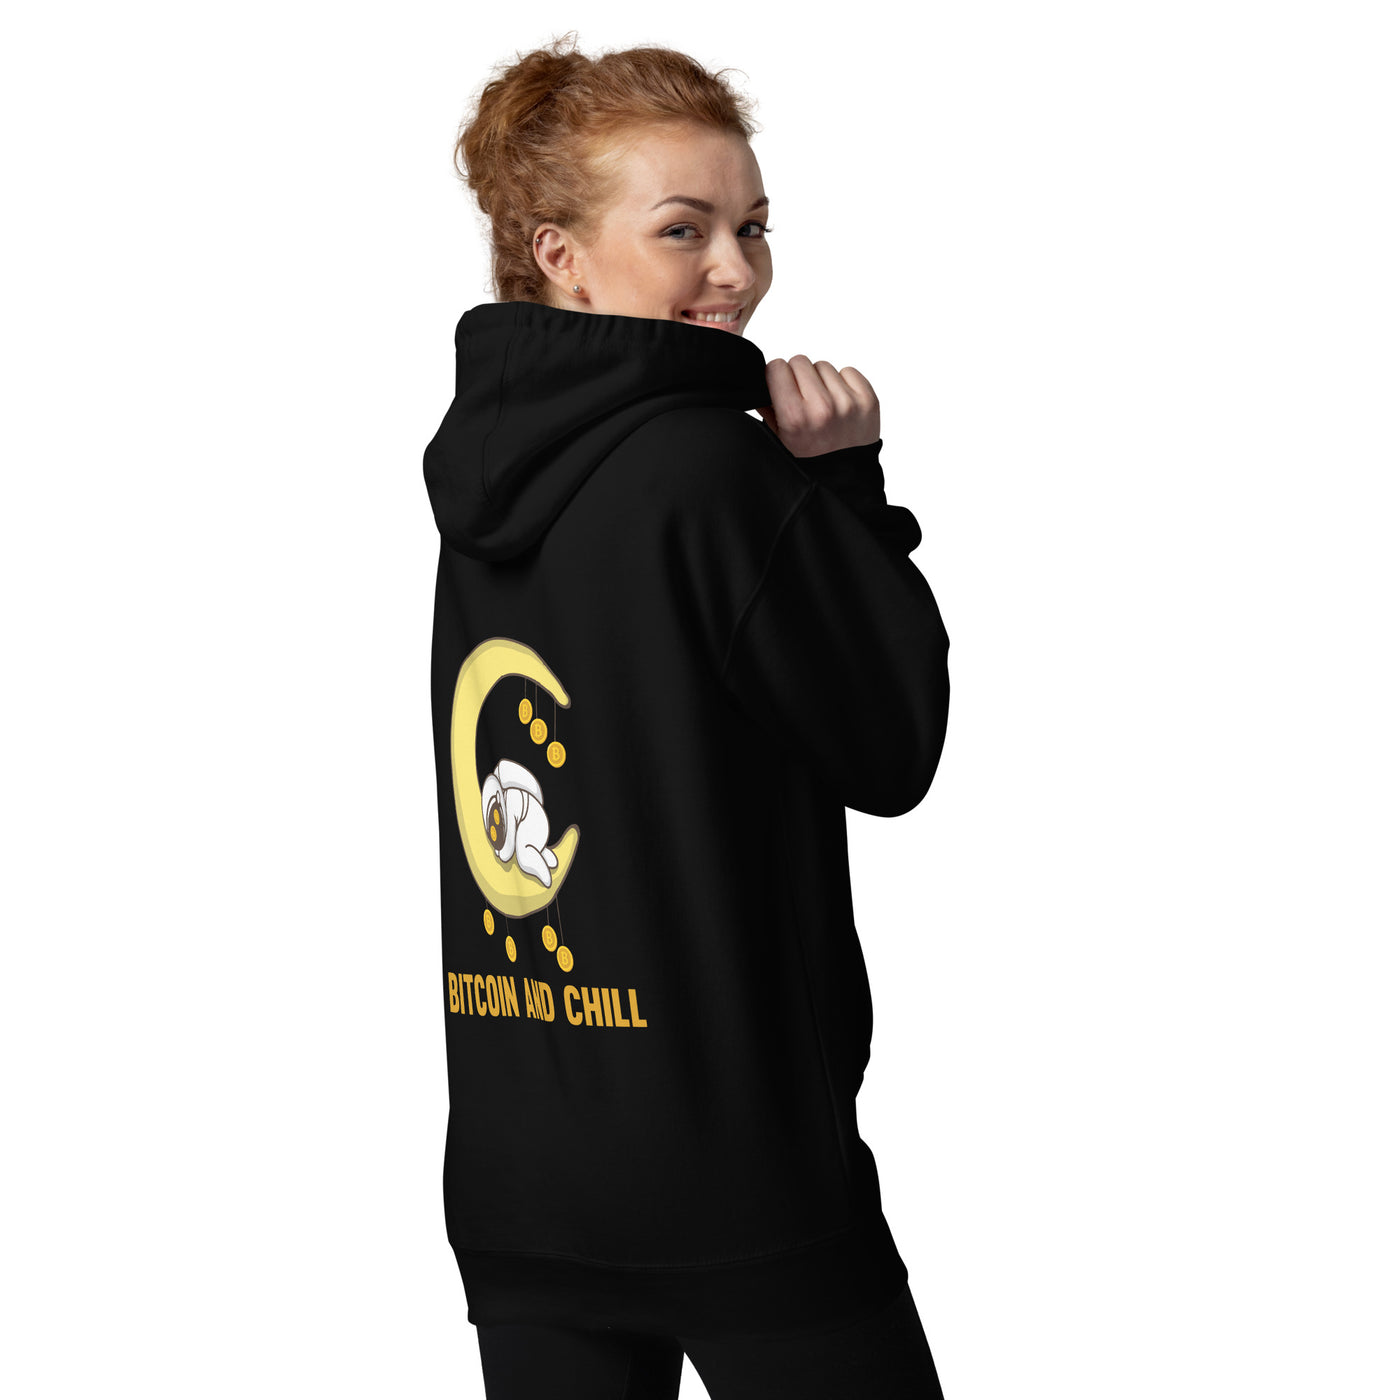 Bitcoin and Chill - Unisex Hoodie ( Back Print )